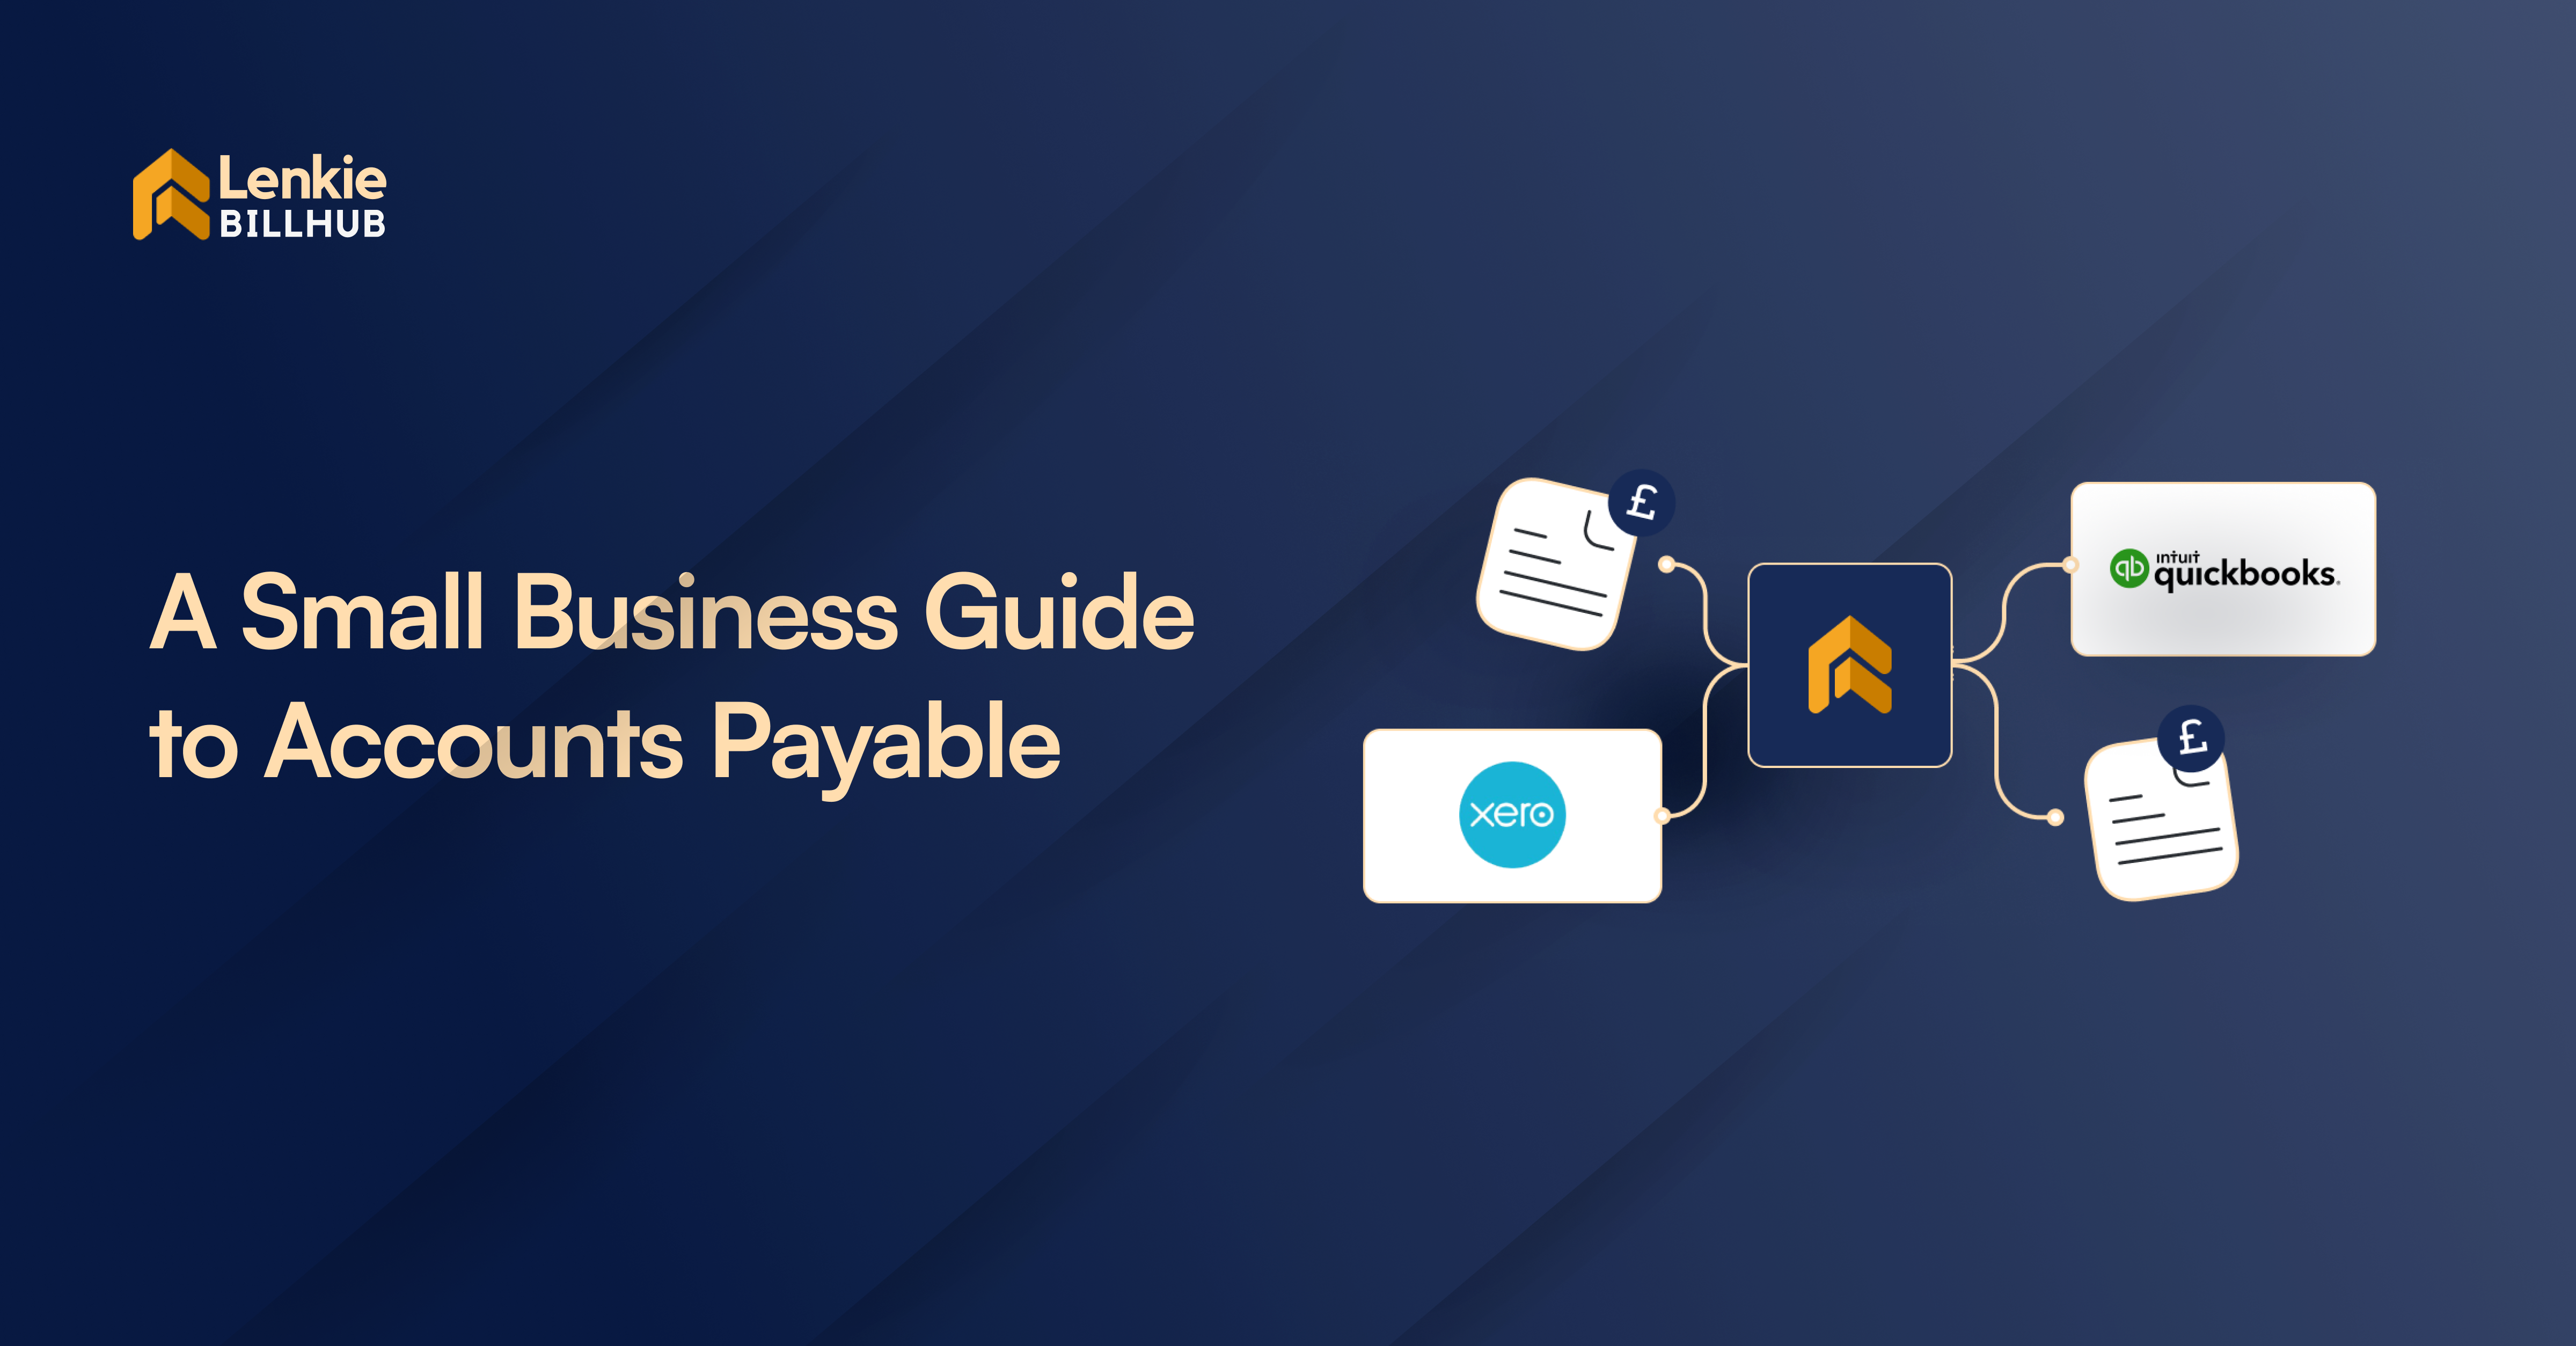 A Small Business Guide to Accounts Payable